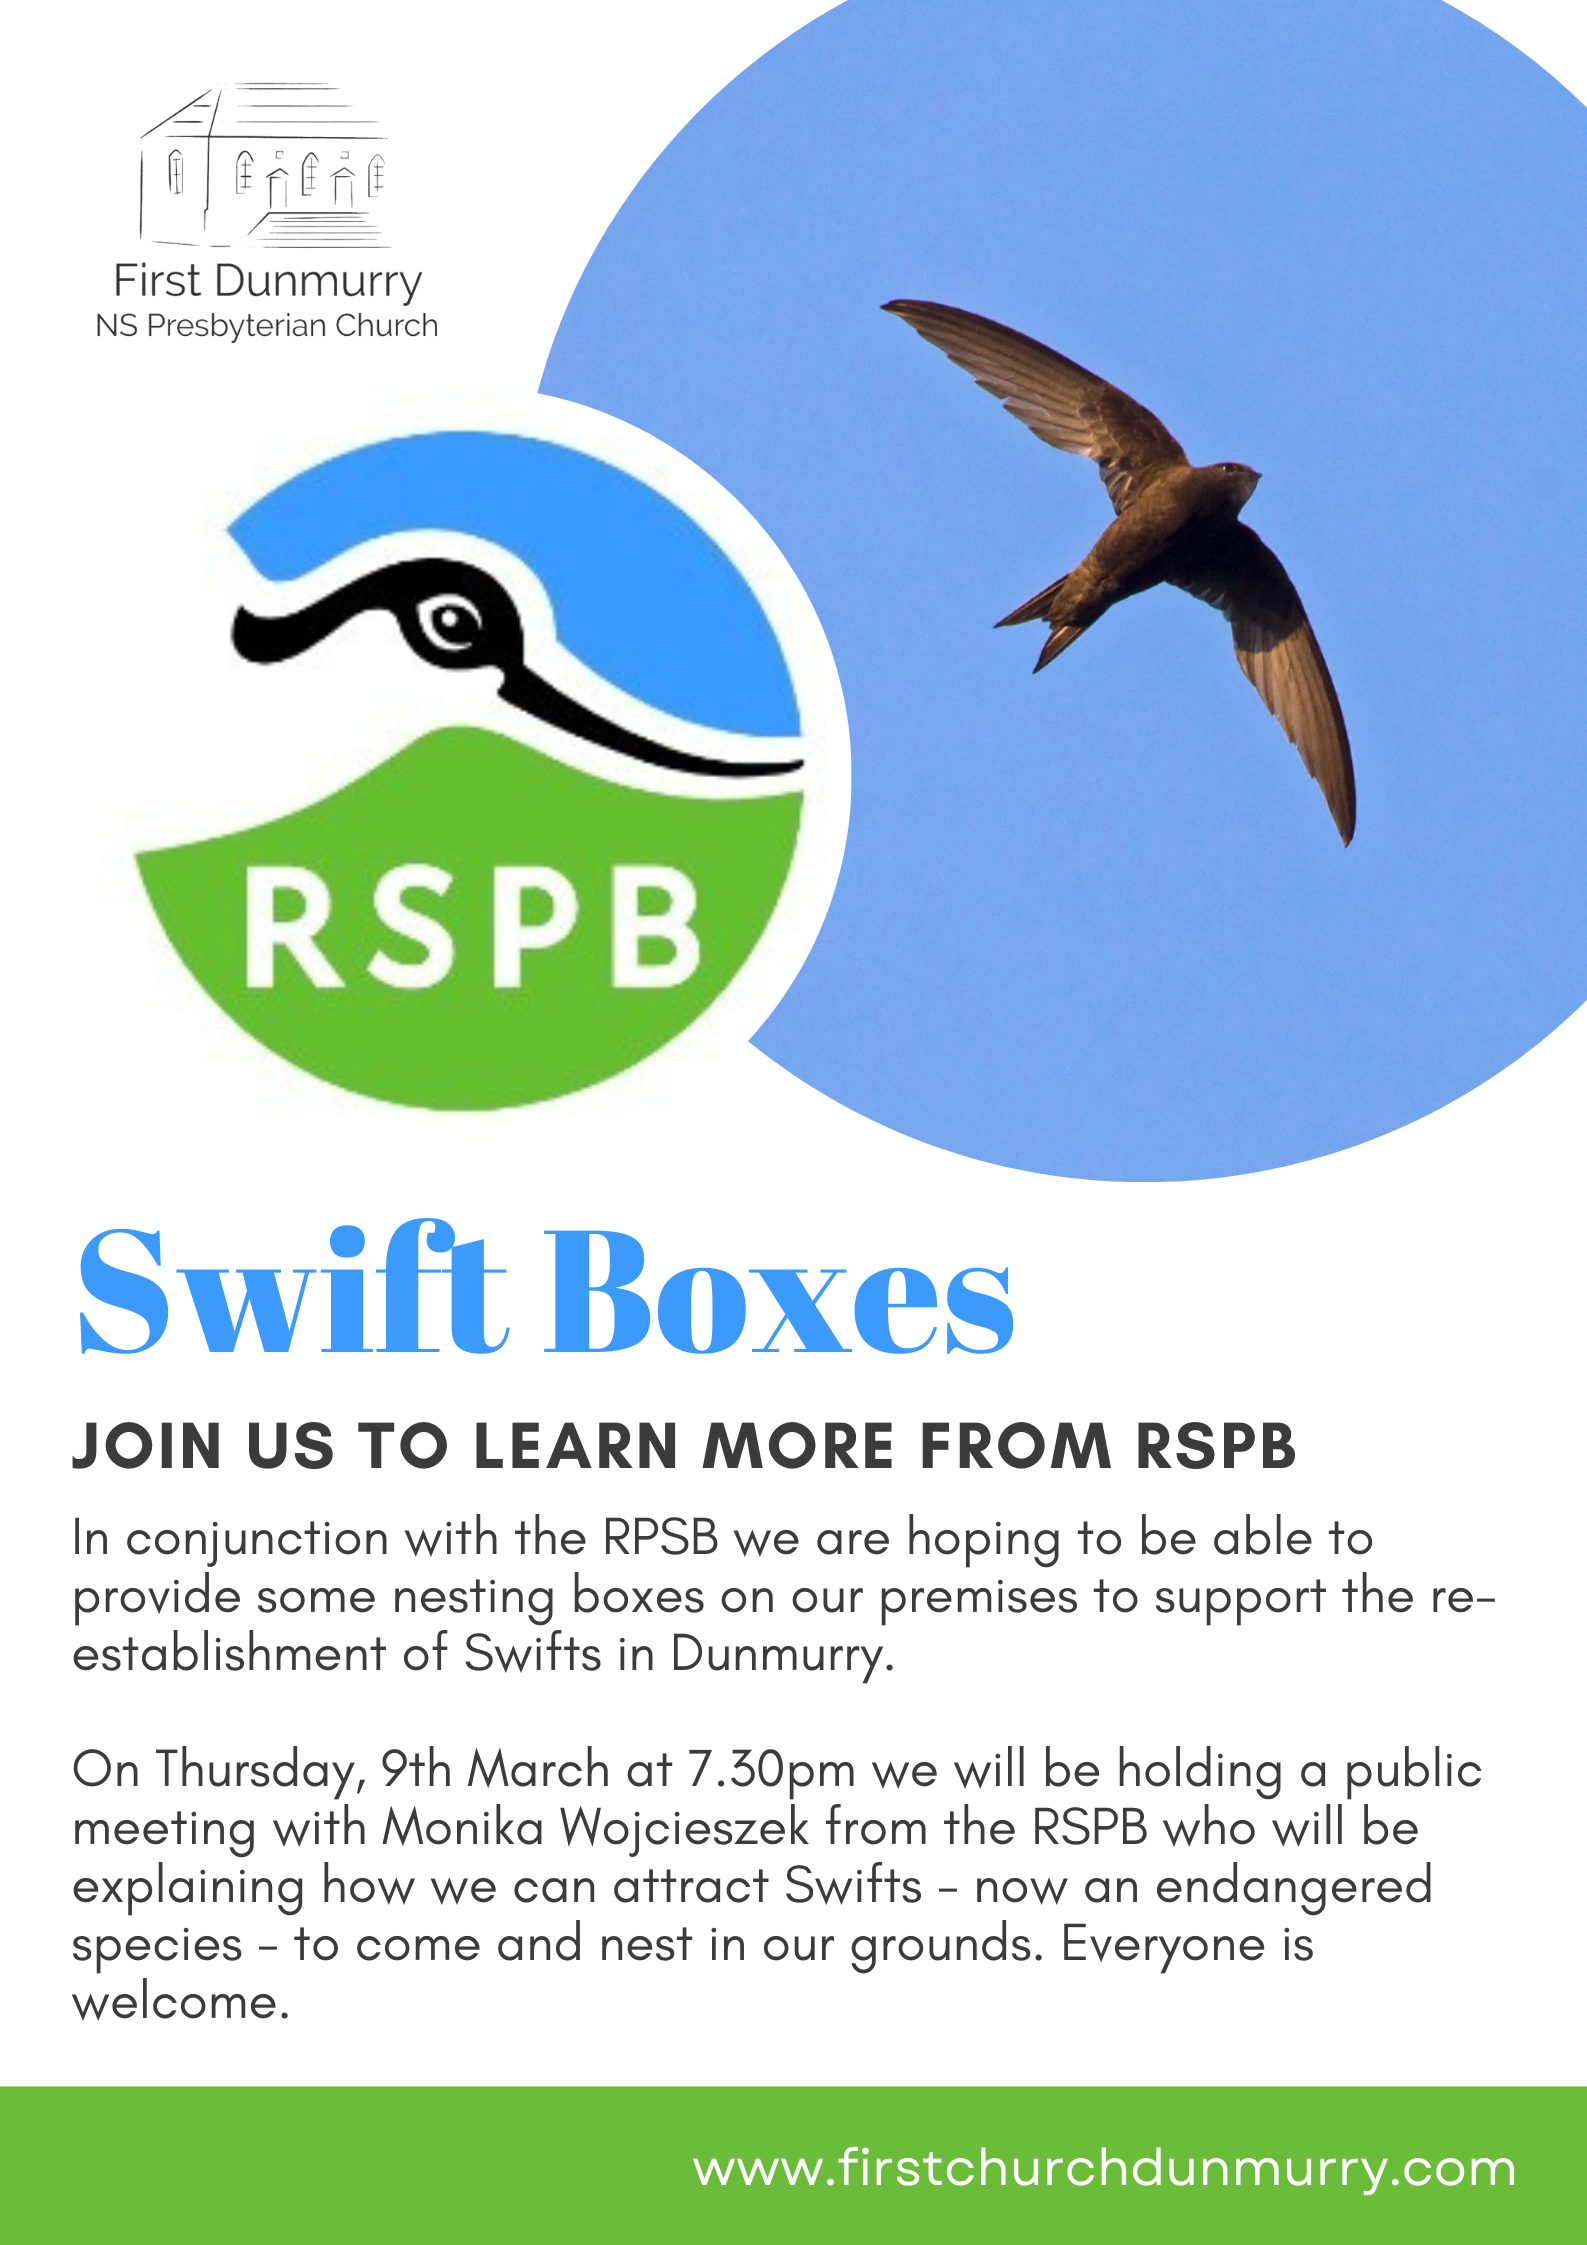 First Dunmurry Swift Boxes